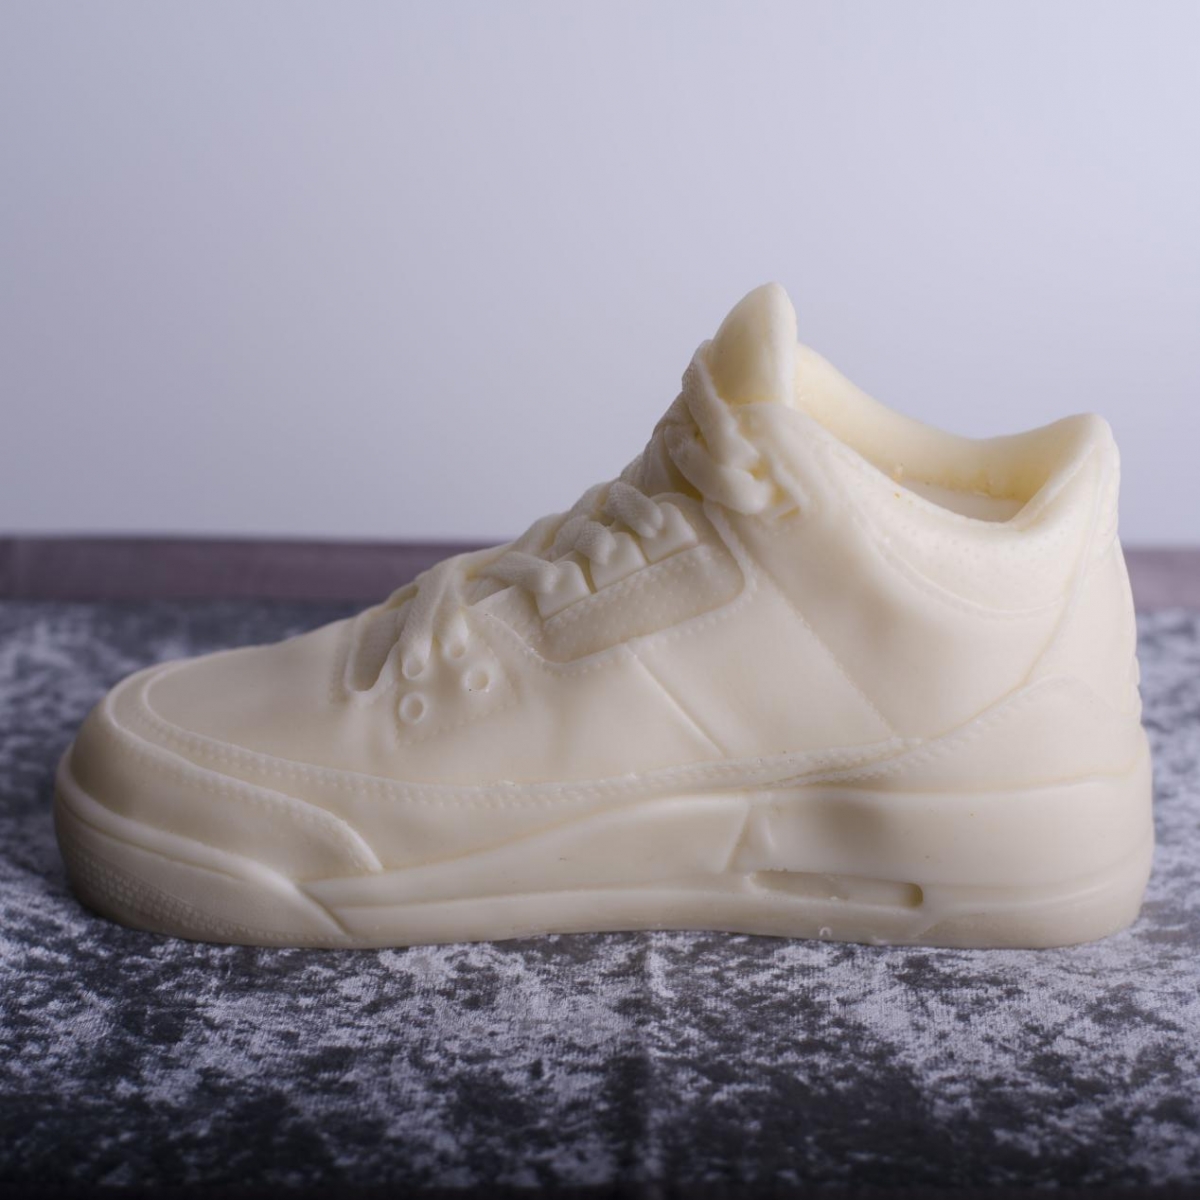 NIKE AIR JORDAN 3 Candles：White Soy Wax,1 to 1 Simulation Sculpture,Scented Candles, Essential Oils, Sneaker Candle, Trainer Candle, Shoes Candle,In Gift Box,China Factory,Best Price-HOWCANDLE-Candles,Scented Candles,Aromatherapy Candles,Soy Candles,Vegan Candles,Jar Candles,Pillar Candles,Candle Gift Sets,Essential Oils,Reed Diffuser,Candle Holder,